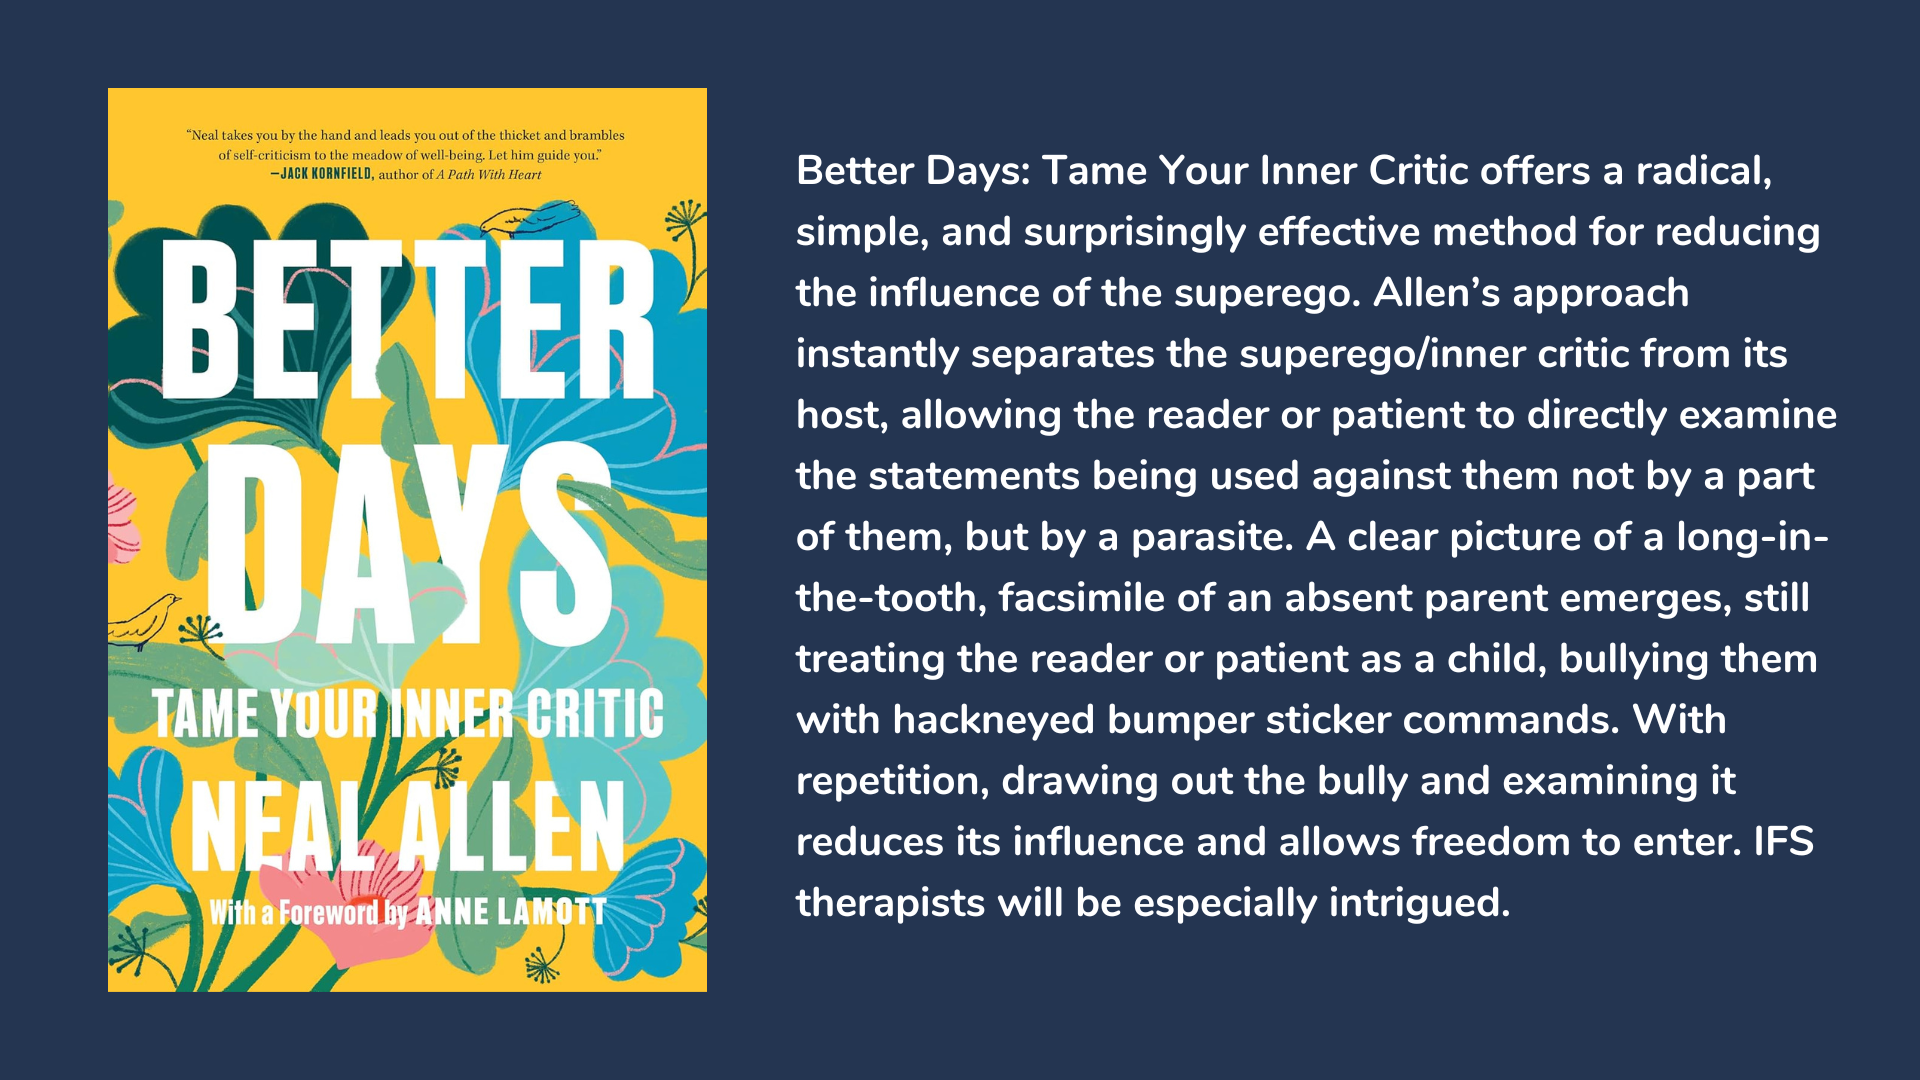 Better Days: Tame Your Inner Critic. Book cover and quote about the book. Latest